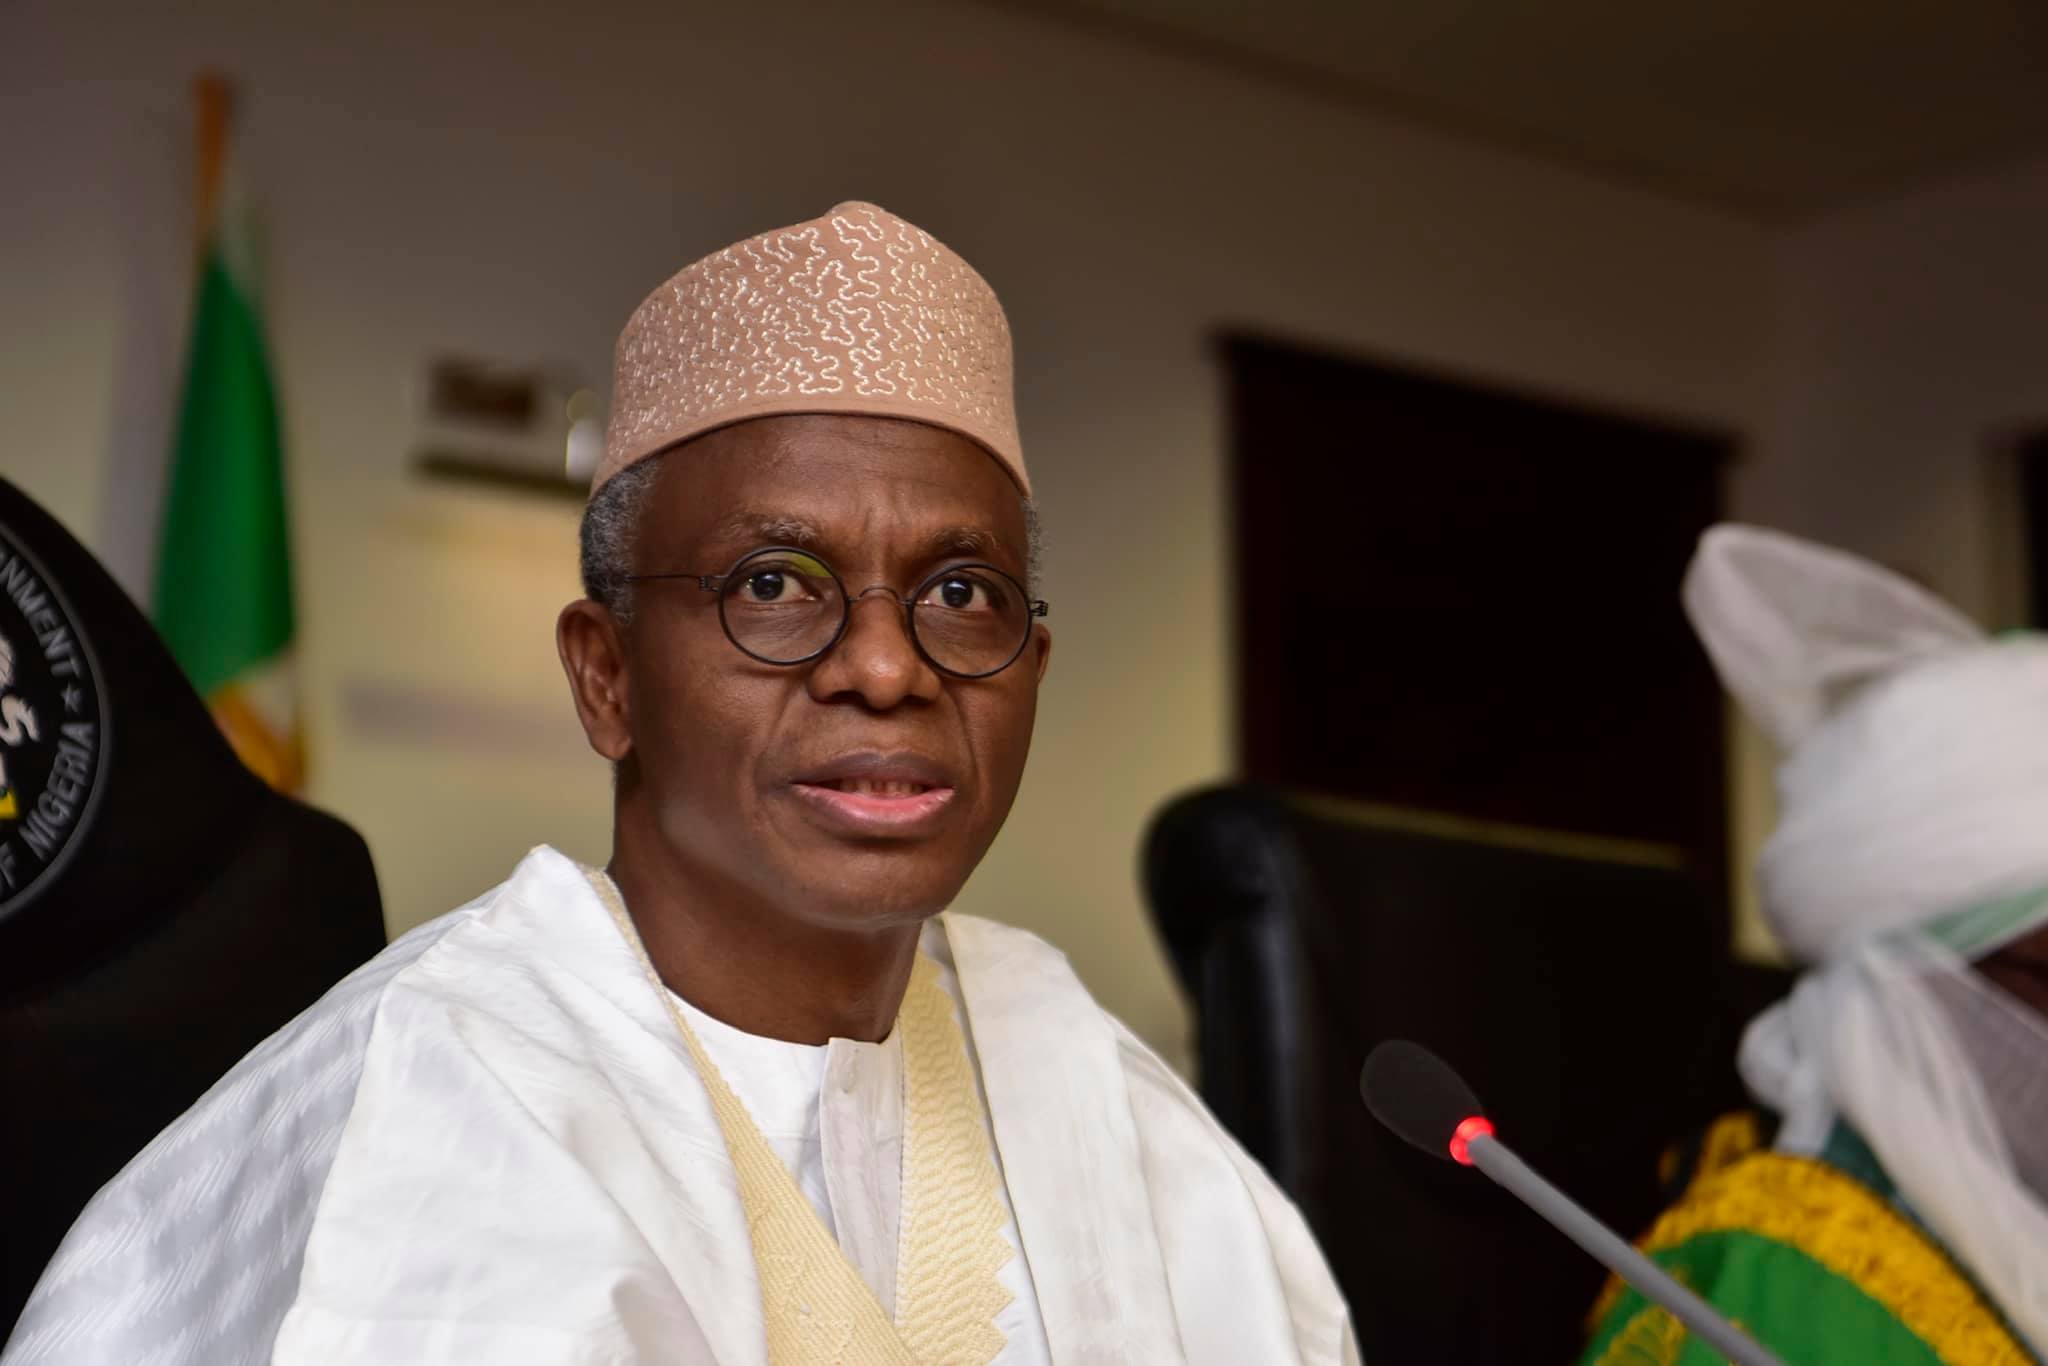 Kaduna Gov't Hasn't Paid for One Laboratory Built in Shehu Idris College of Health Sciences in 2020 — Contractor in Serious Debt